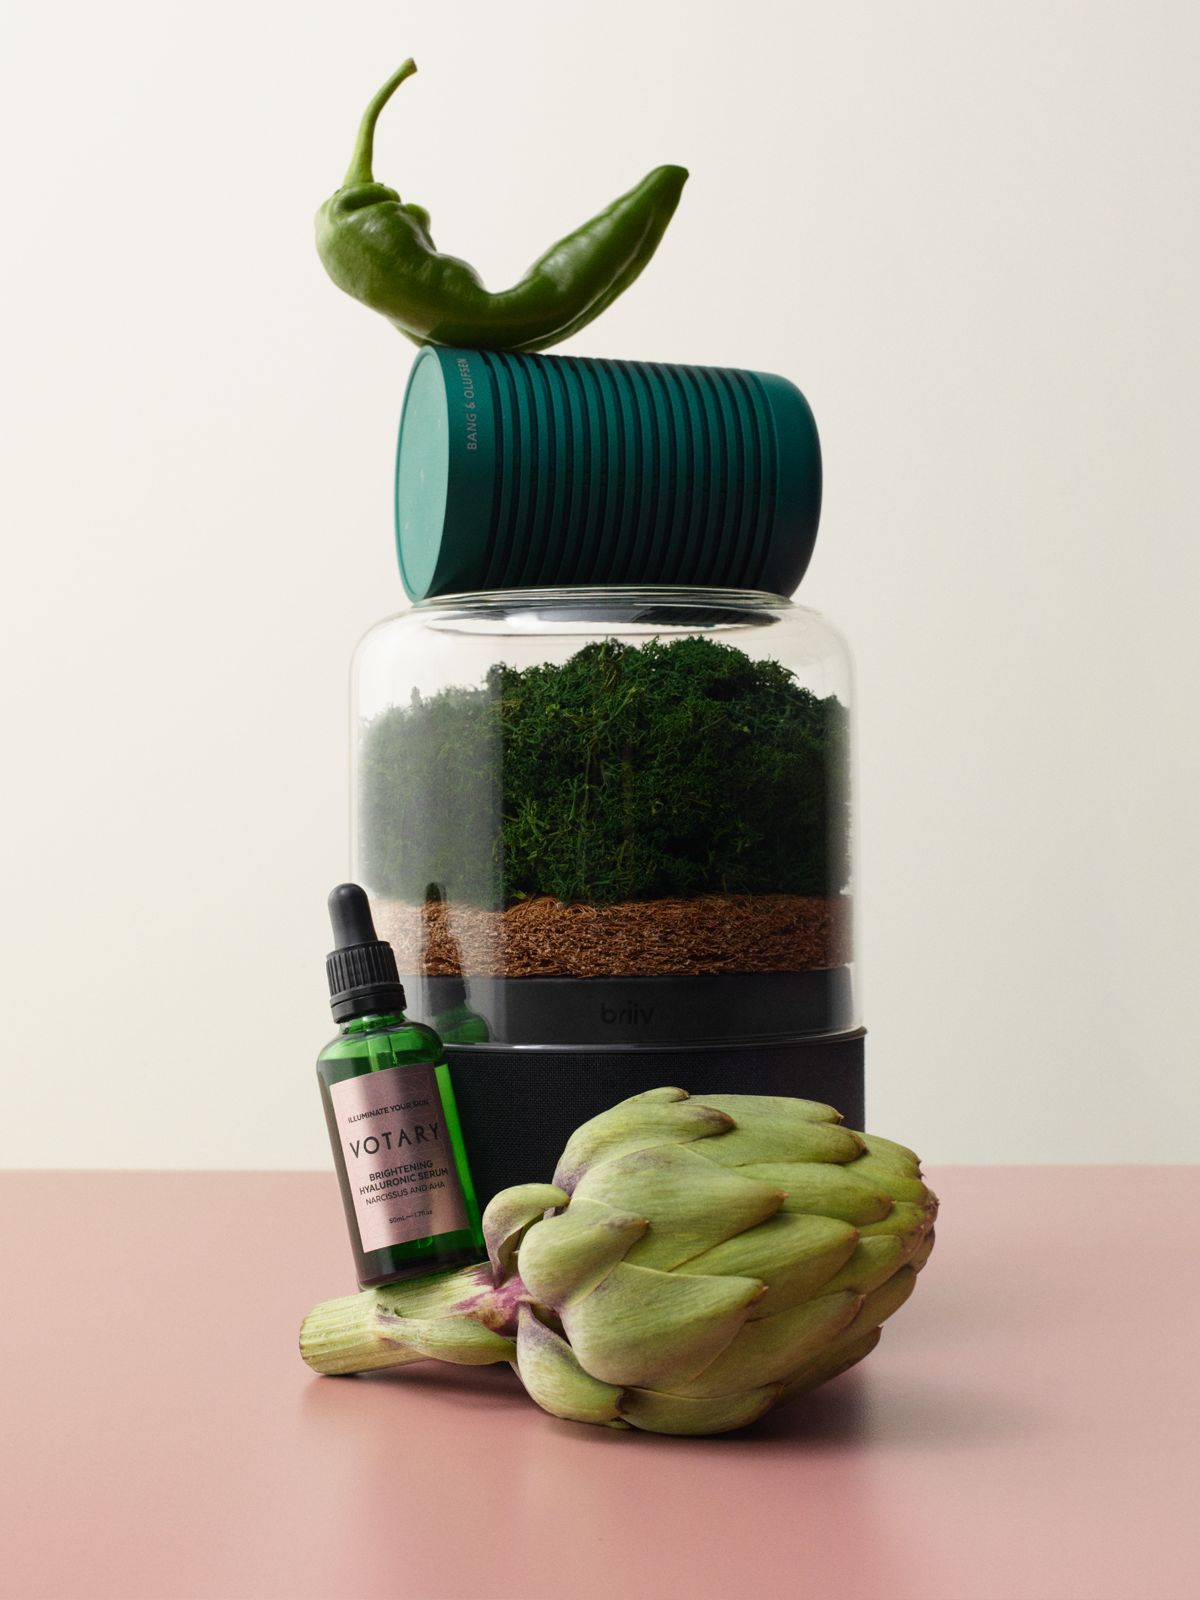 Image of a Votary product stacked on a globe artichoke